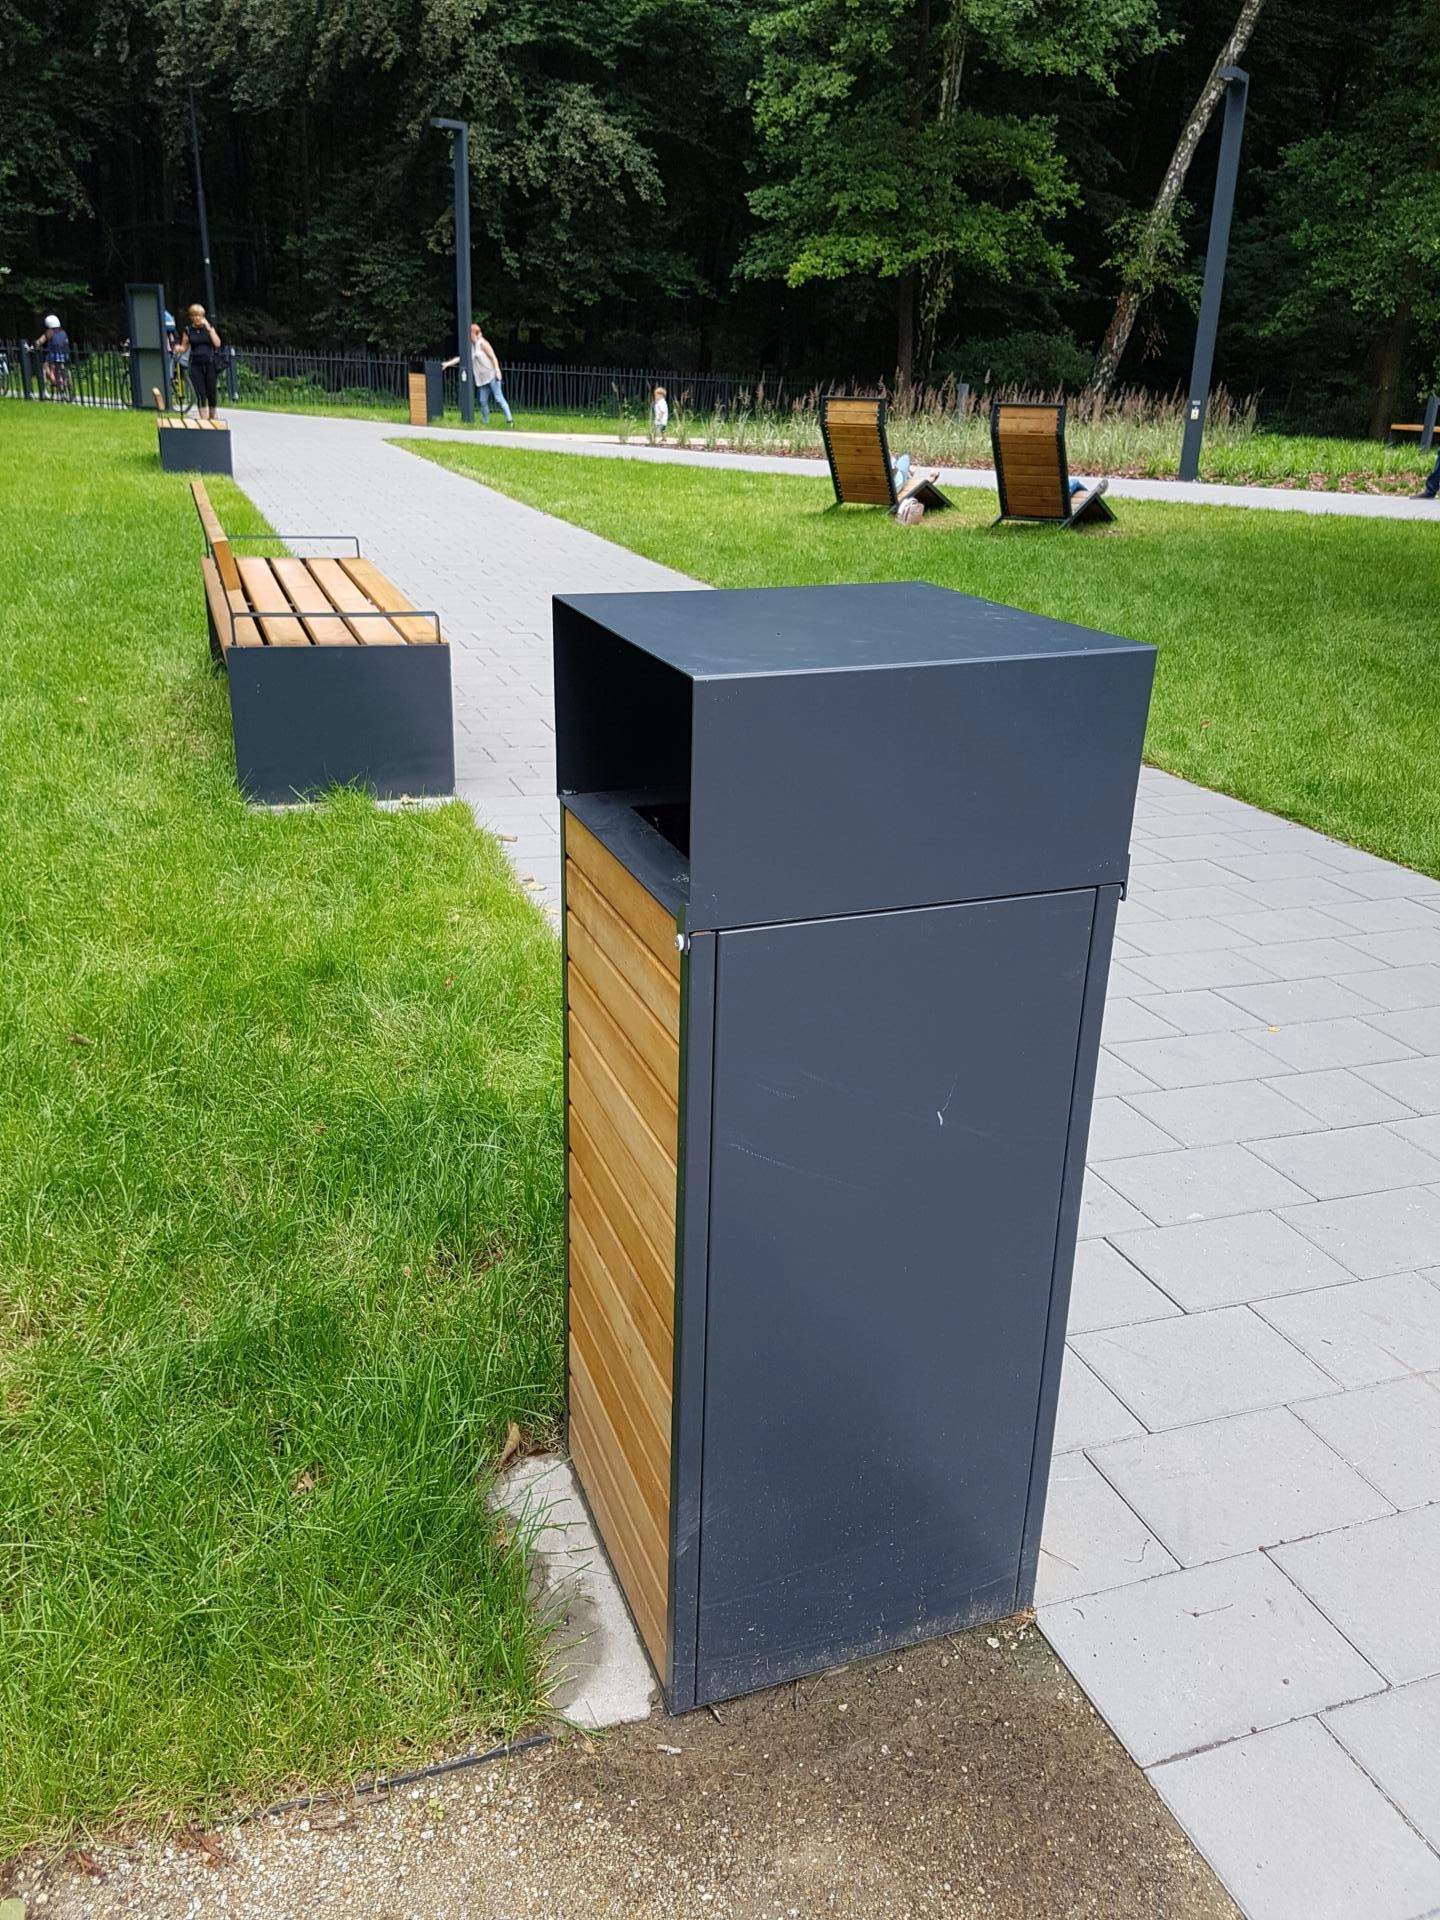 small architecture benches and garbage cans